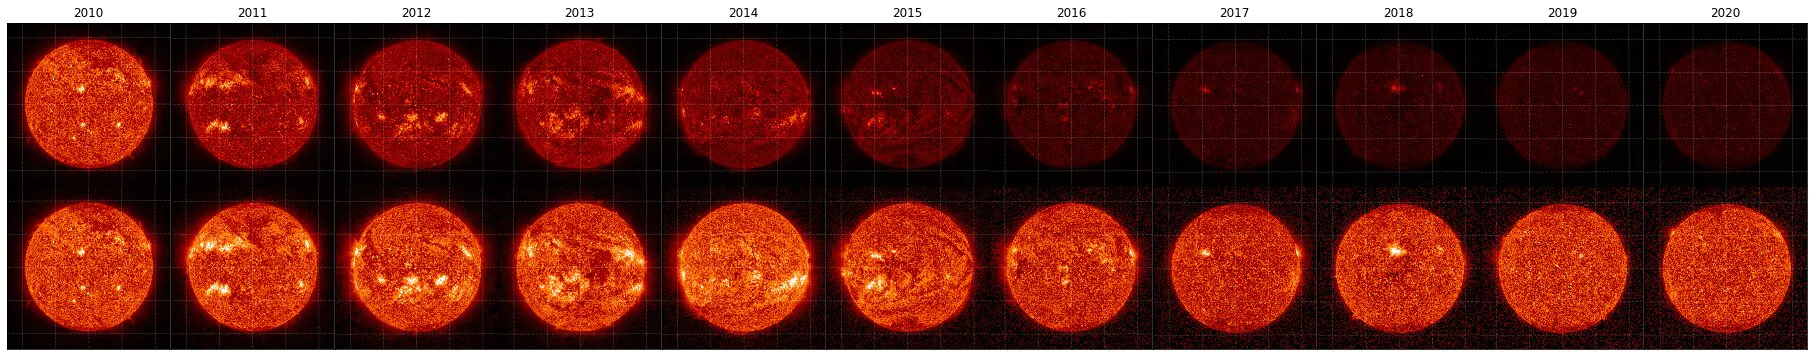 NASA images of the Sun